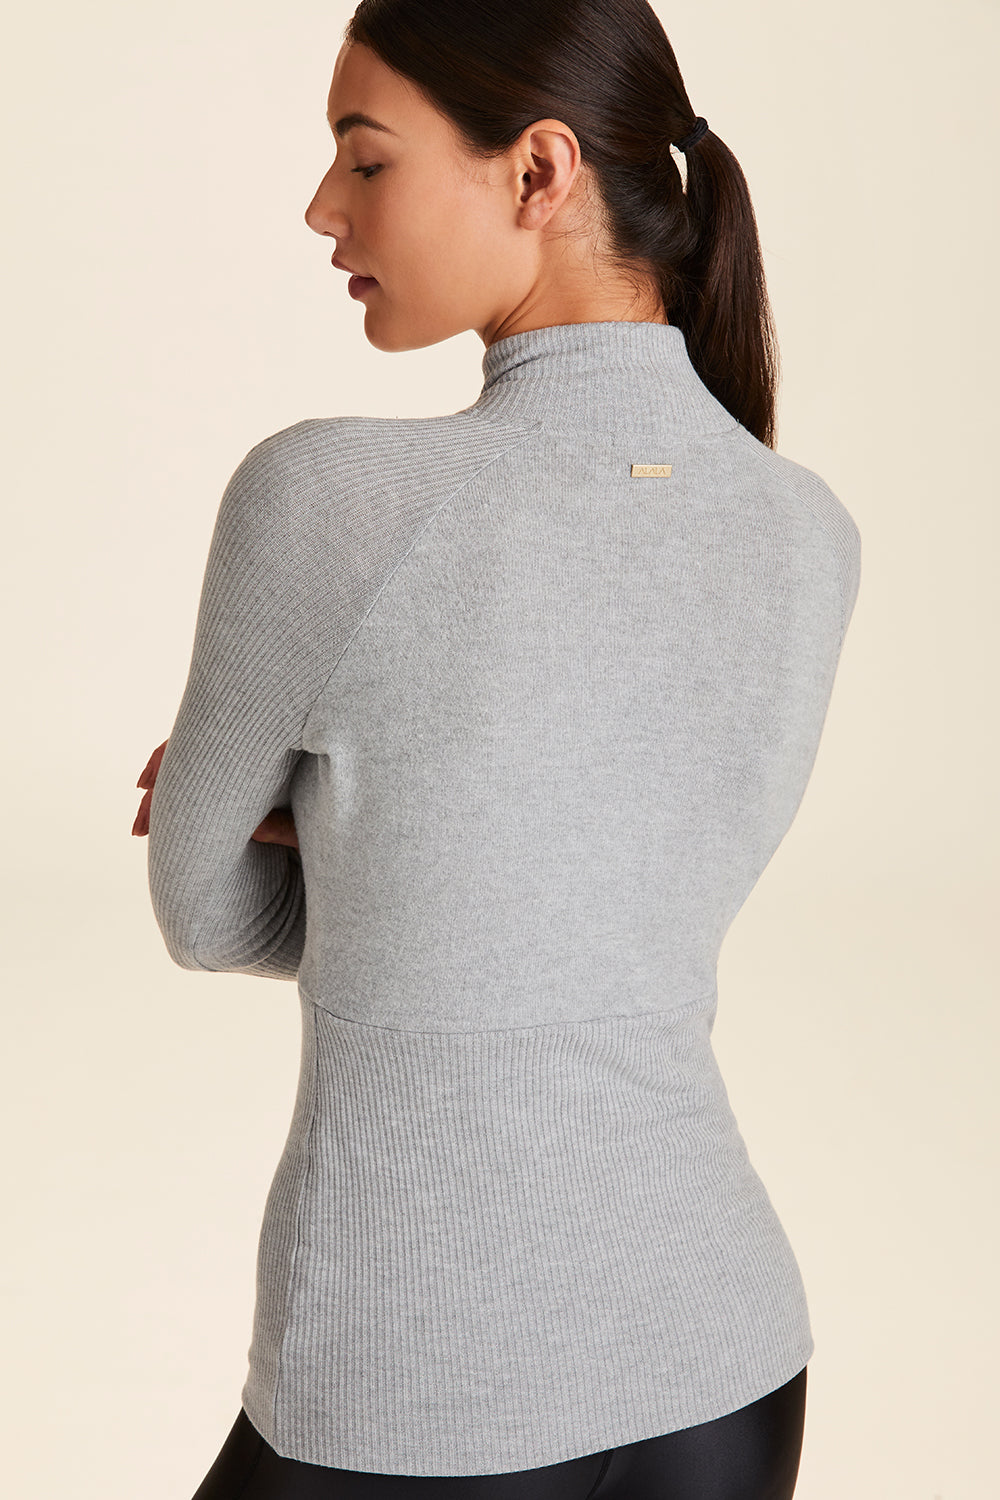 Back view of Alala Women's Luxury Athleisure super=soft quarter zip pullover